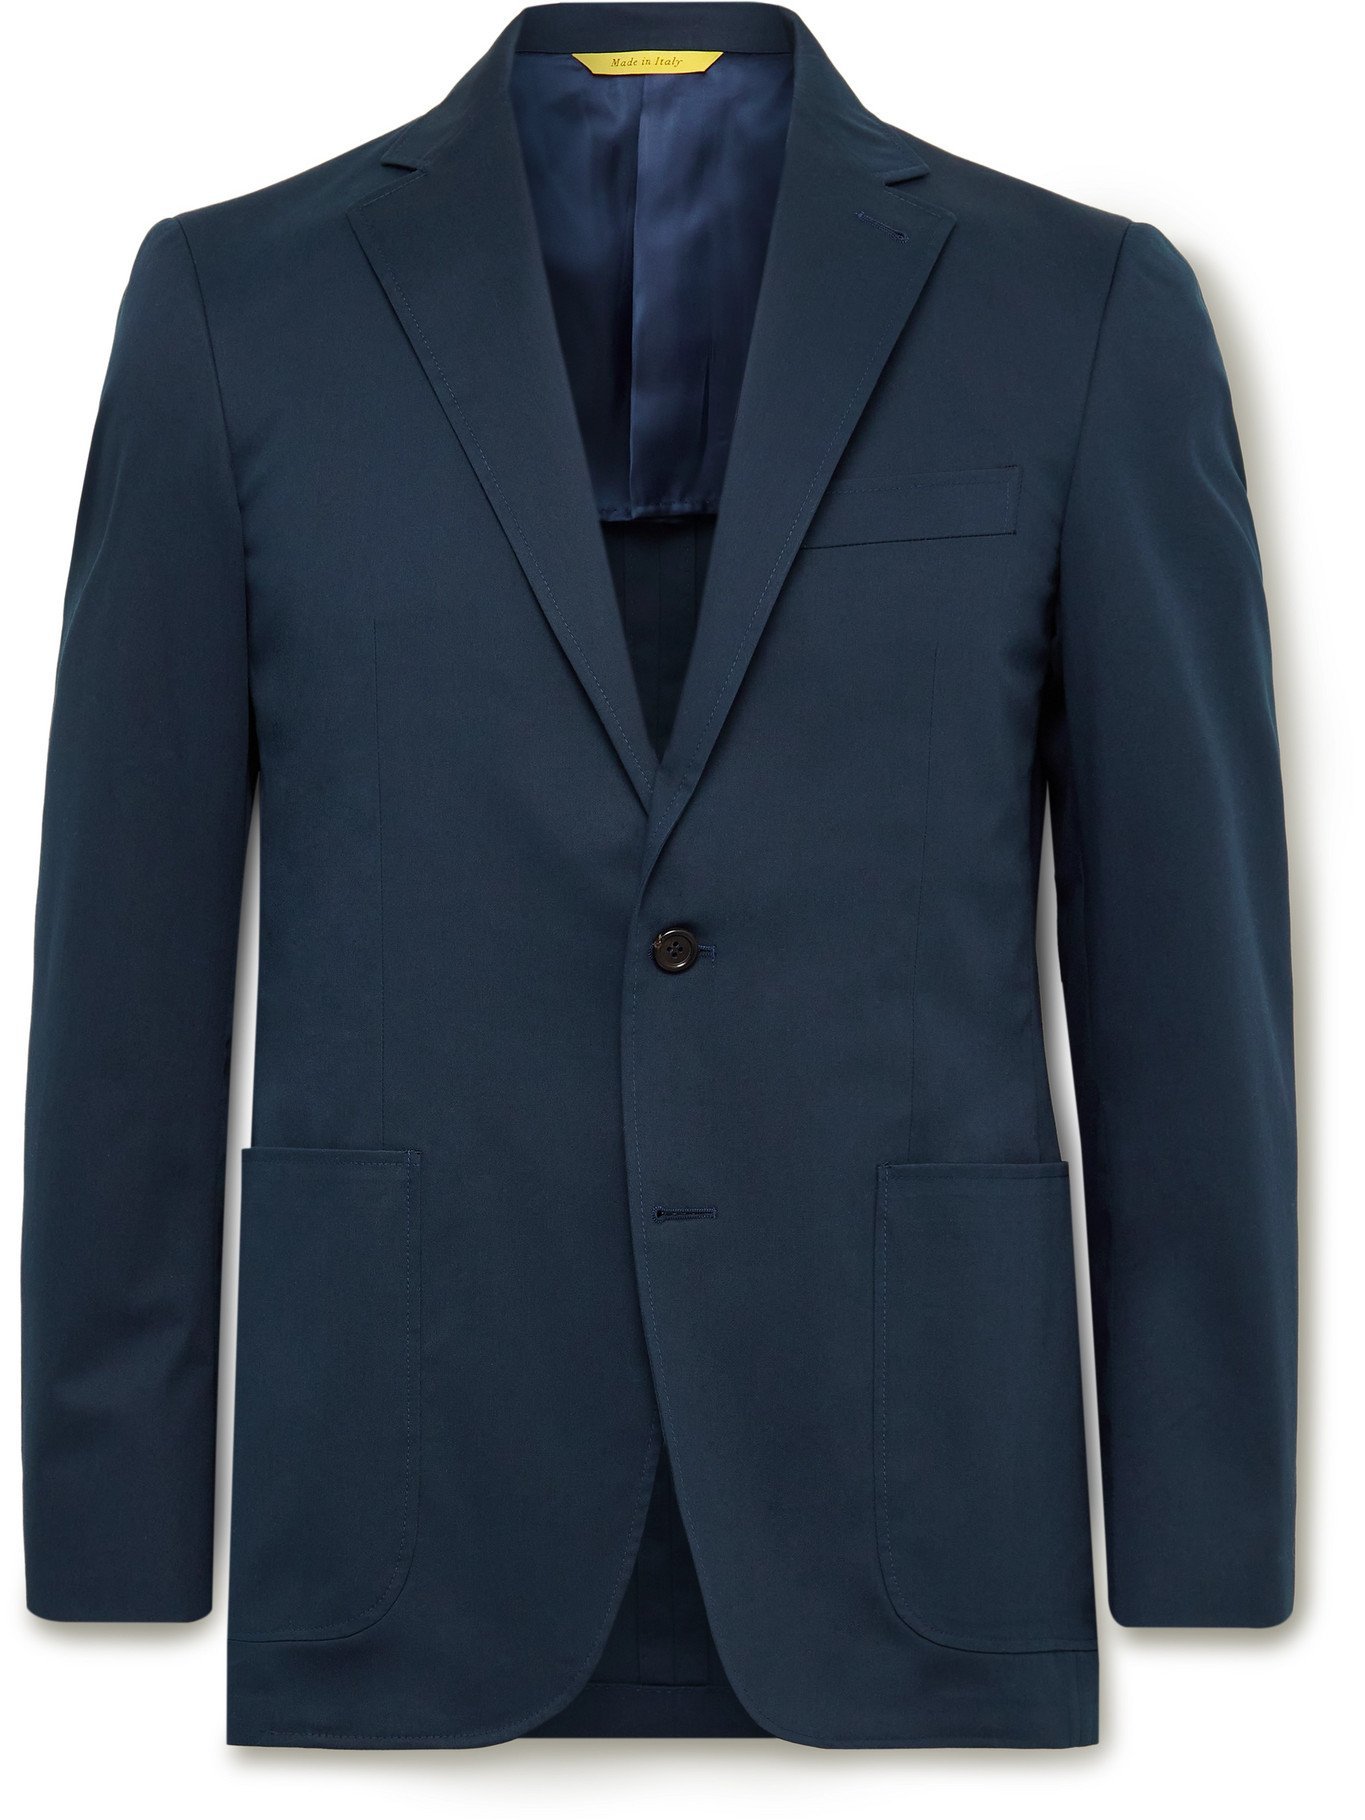 CANALI - Kei Slim-Fit Stretch-Cotton Twill Suit Jacket - Blue Canali